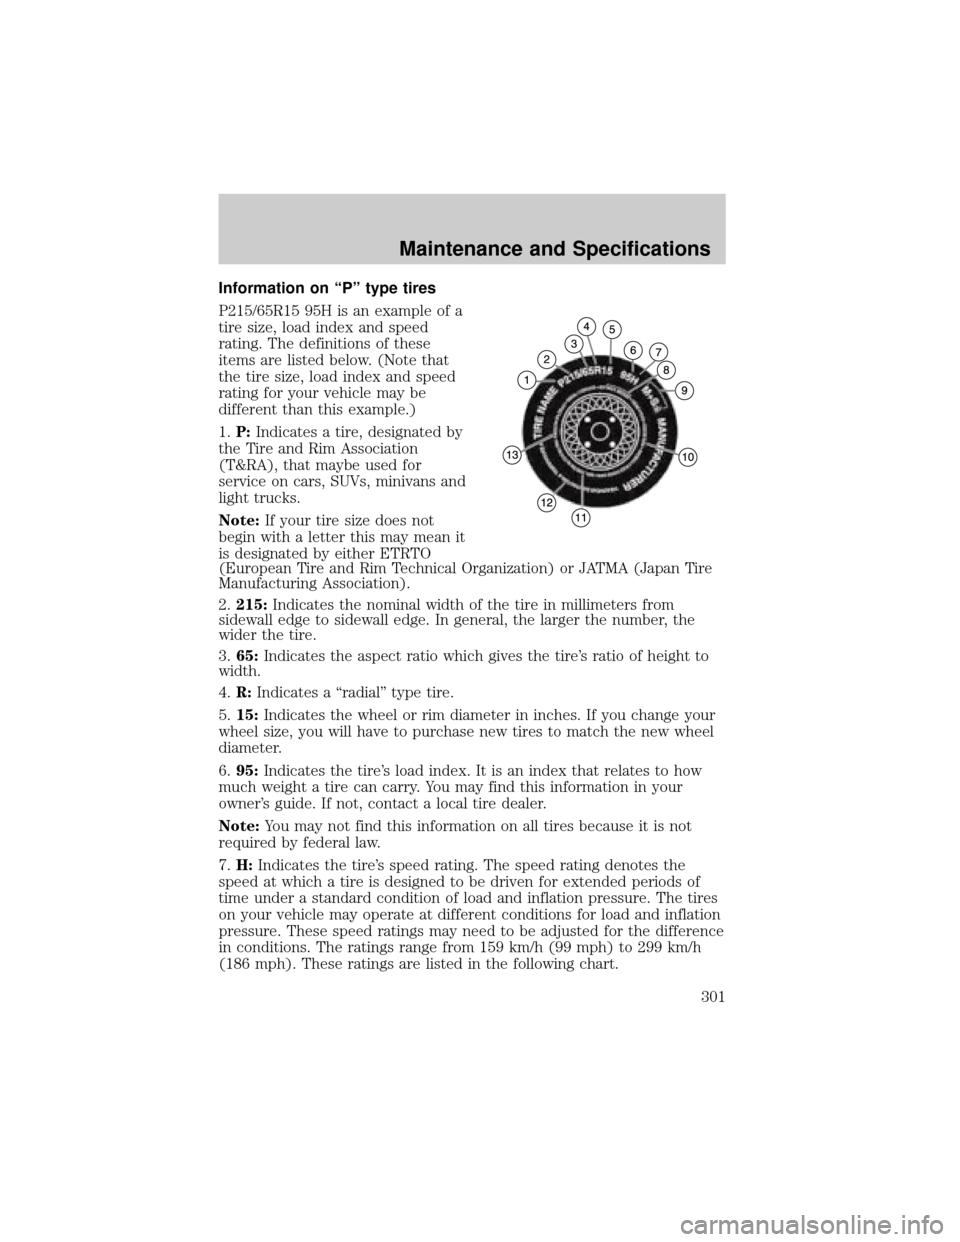 LINCOLN AVIATOR 2004 User Guide Information on ªPº type tires
P215/65R15 95H is an example of a
tire size, load index and speed
rating. The definitions of these
items are listed below. (Note that
the tire size, load index and spee